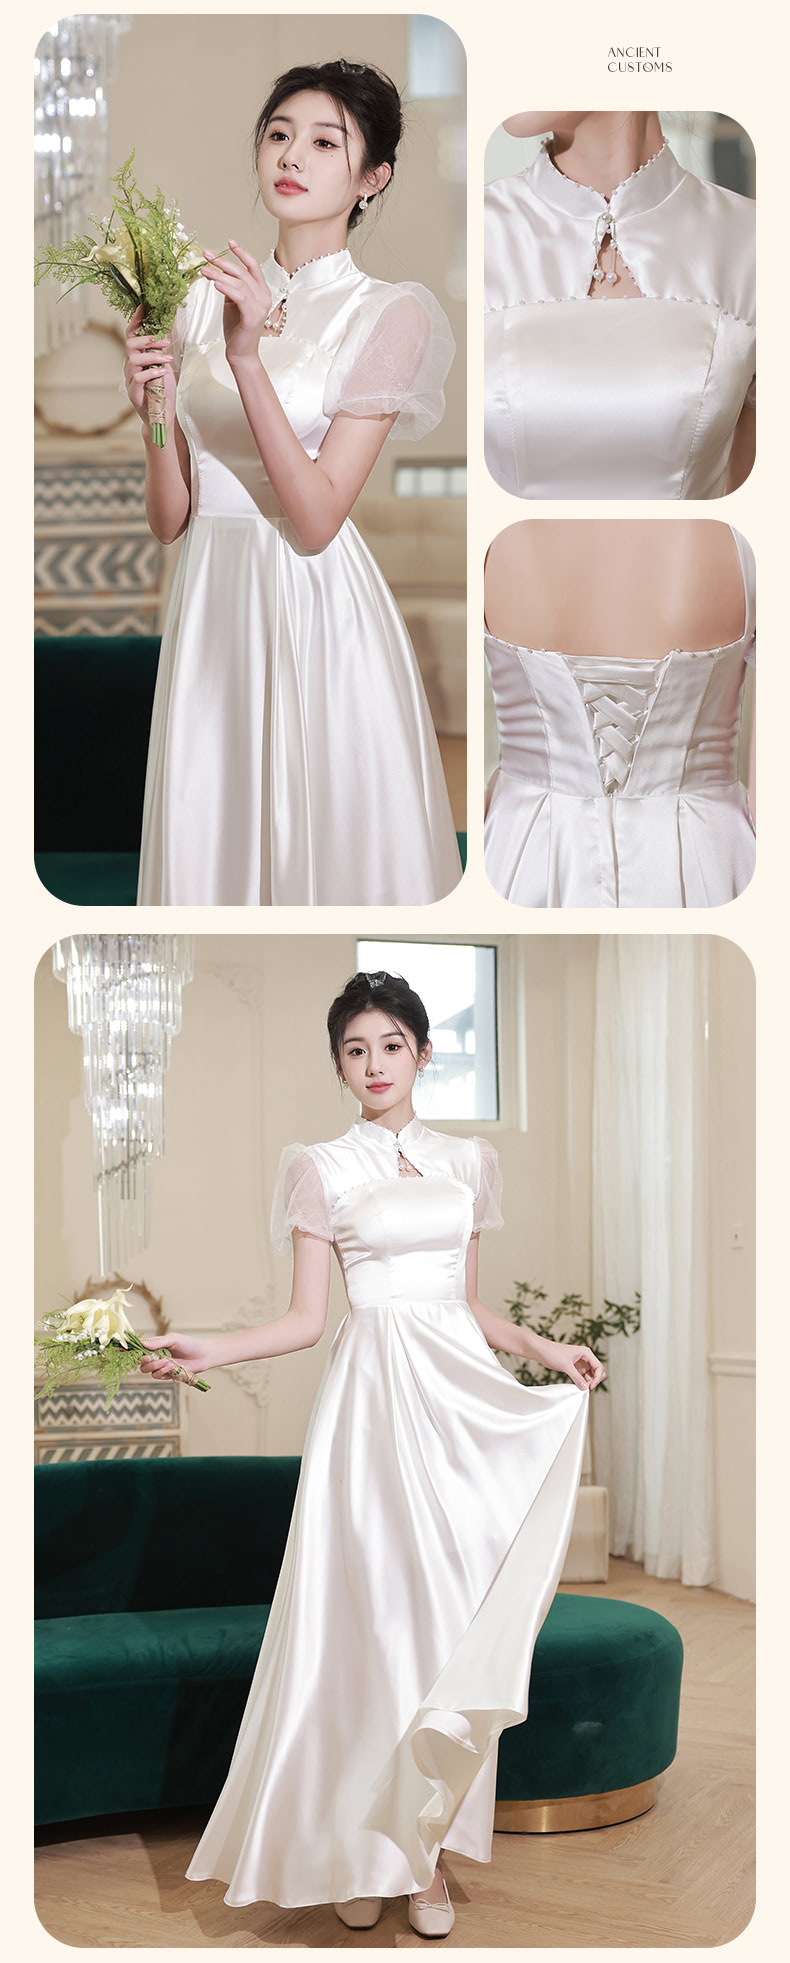 Sweet-White-Satin-Wedding-Party-Dress-Homecoming-Evening-Gown24